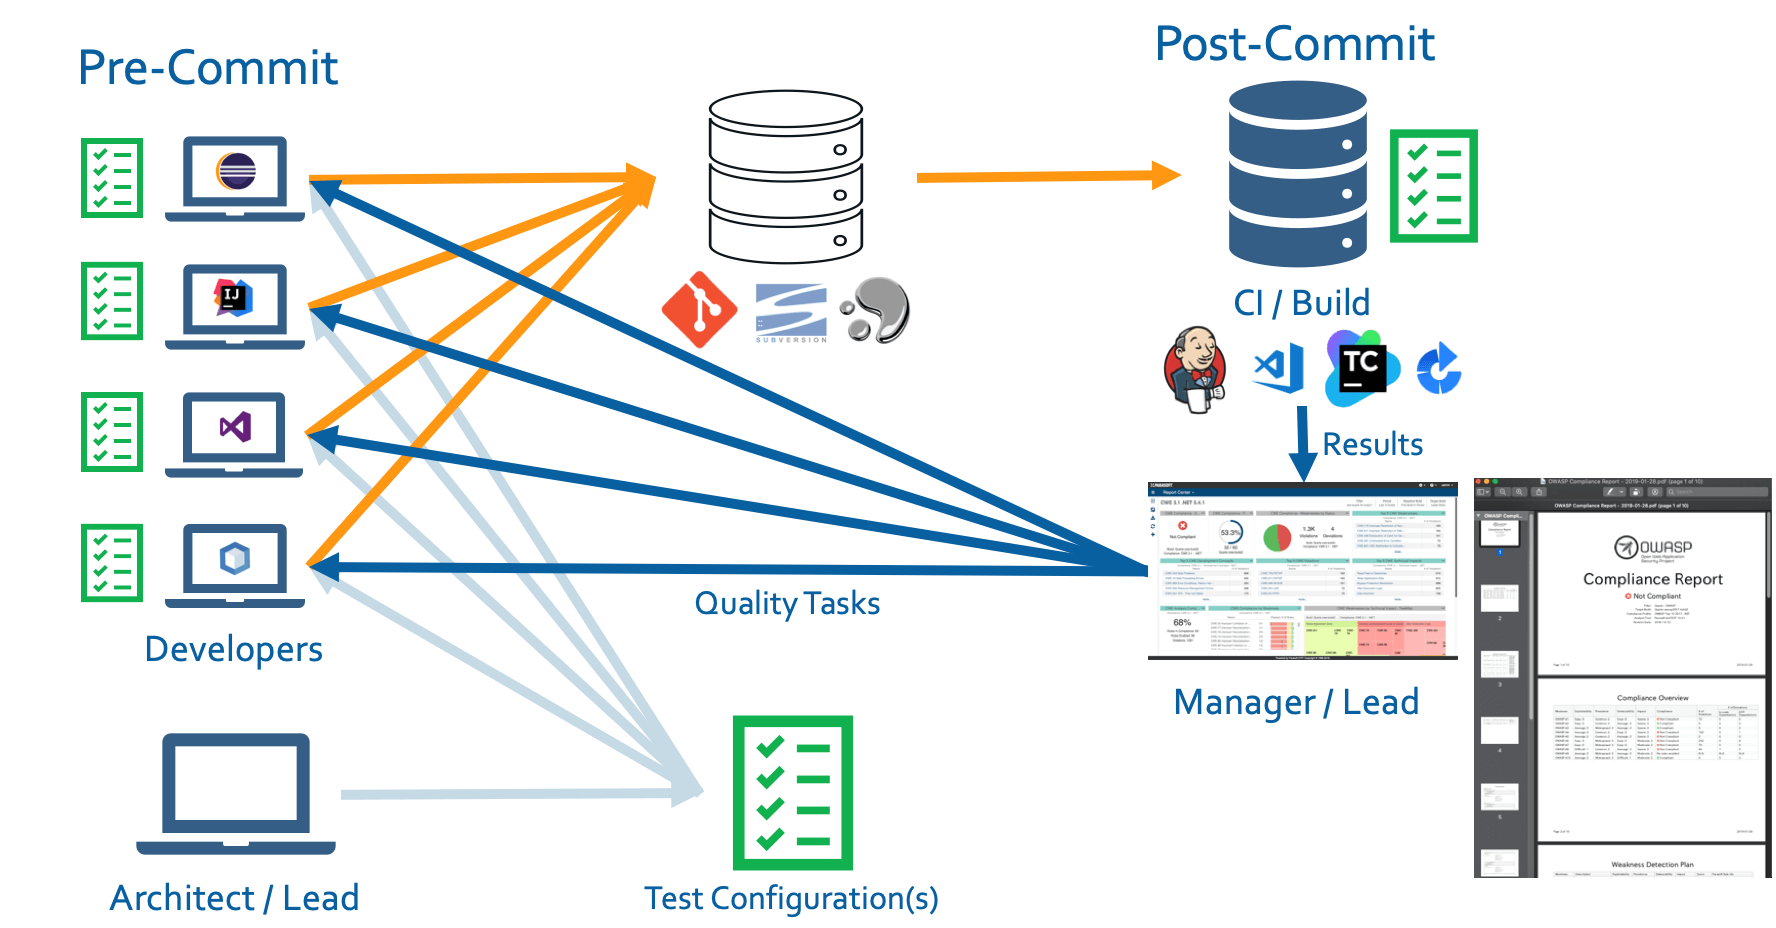 Graphic showing the full SecDevOps workflow moving from architects/leads to test configurations to precommit with developers on to postcommit in the CI/build and finally compliance report for managers and leads.